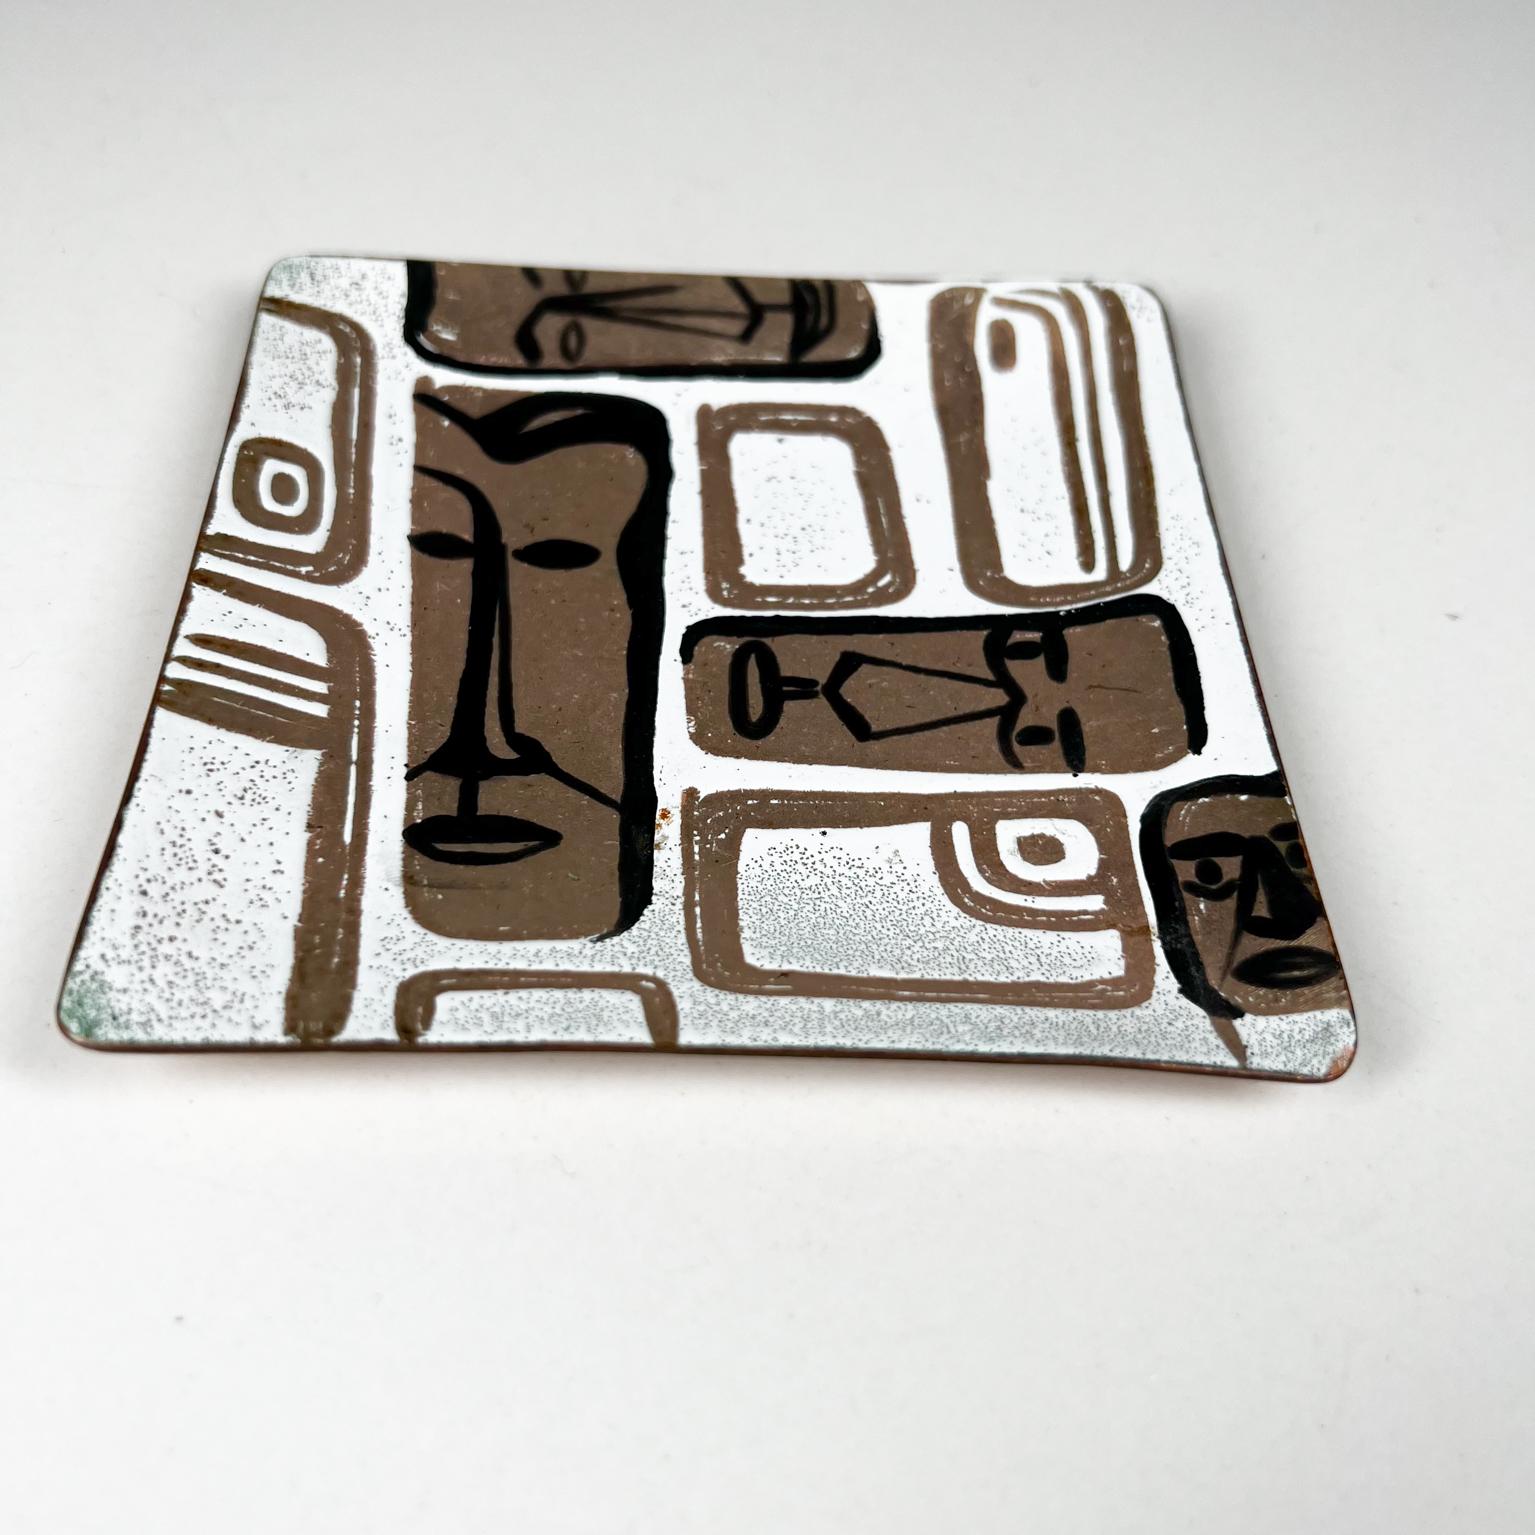 1950s Carl Wyman Modernist Copper Enamel Plate African Motif Ohio
Copper Enamel Square Plate 
Signed
4 x 4 x .38
Preowned unrestored vintage plate.
See images provided.